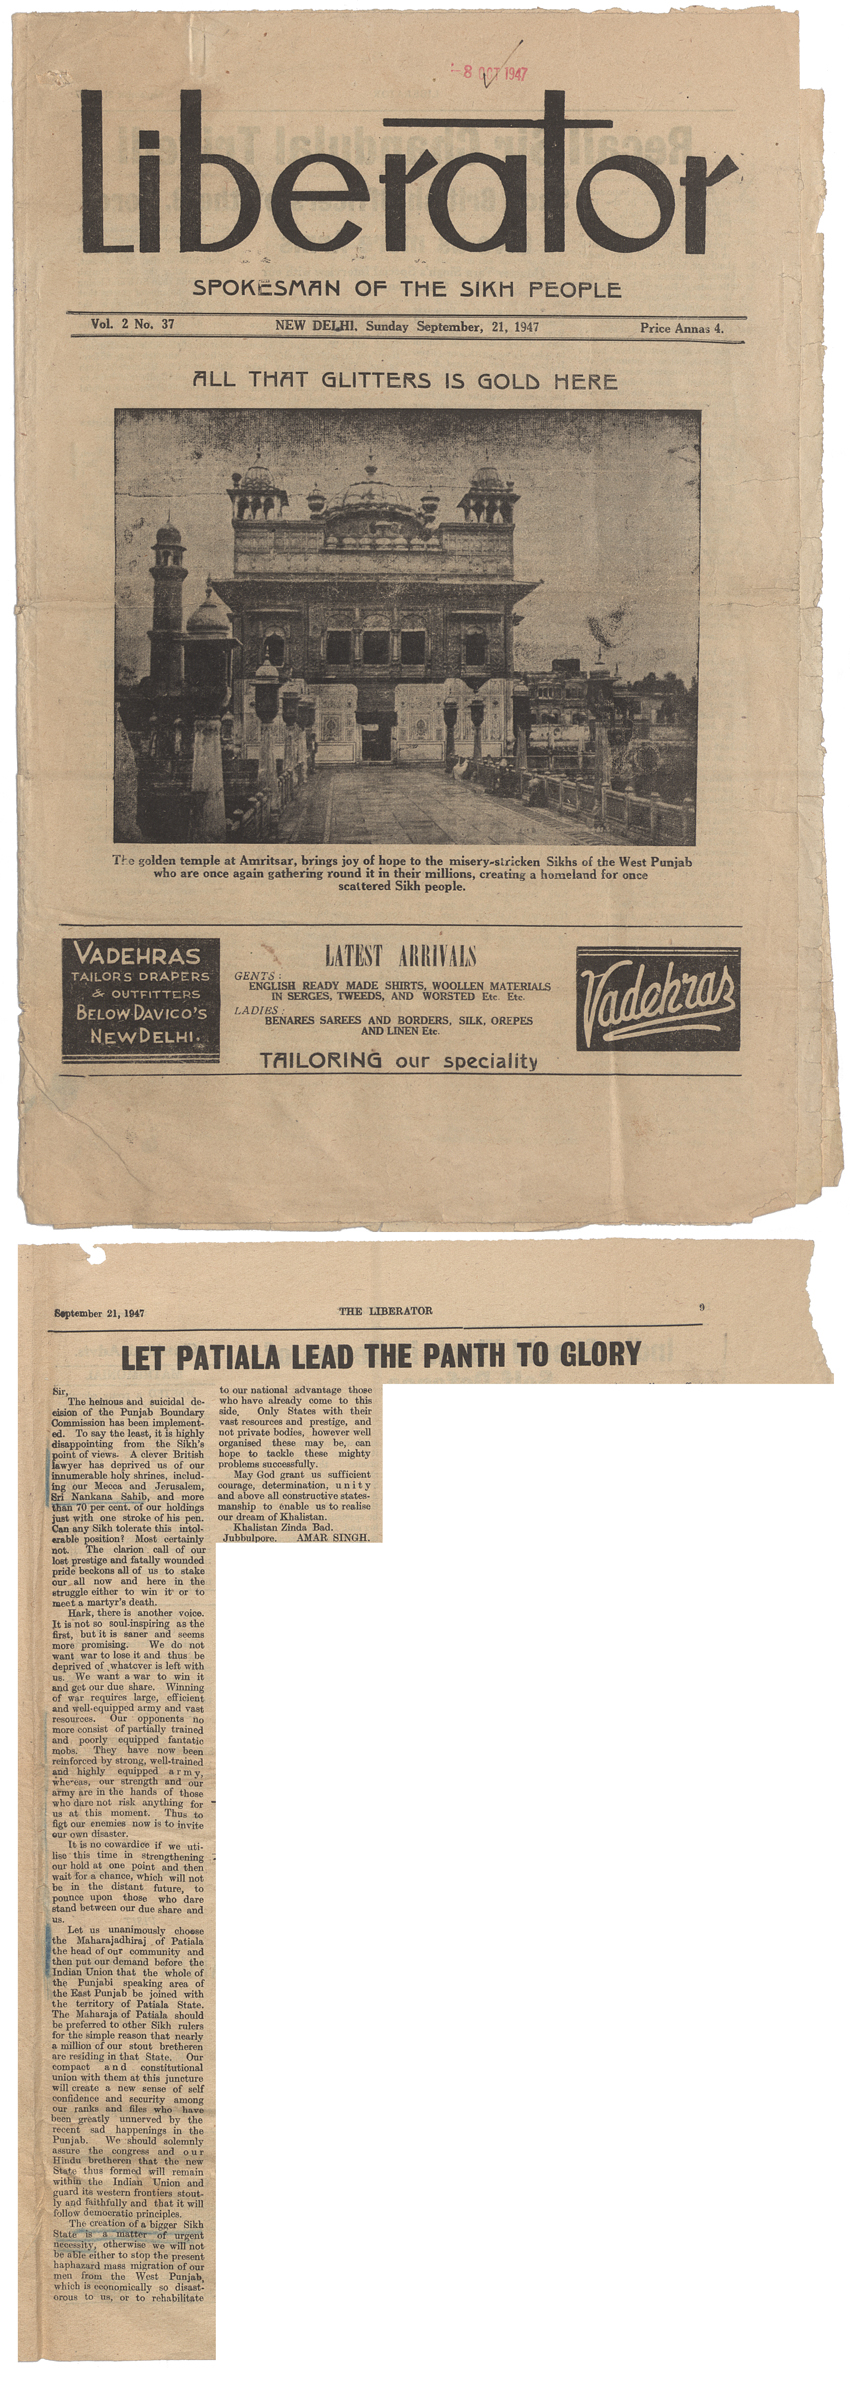 Newspaper article with a monochrome photograph of the golden temple at Amritsar at the top.